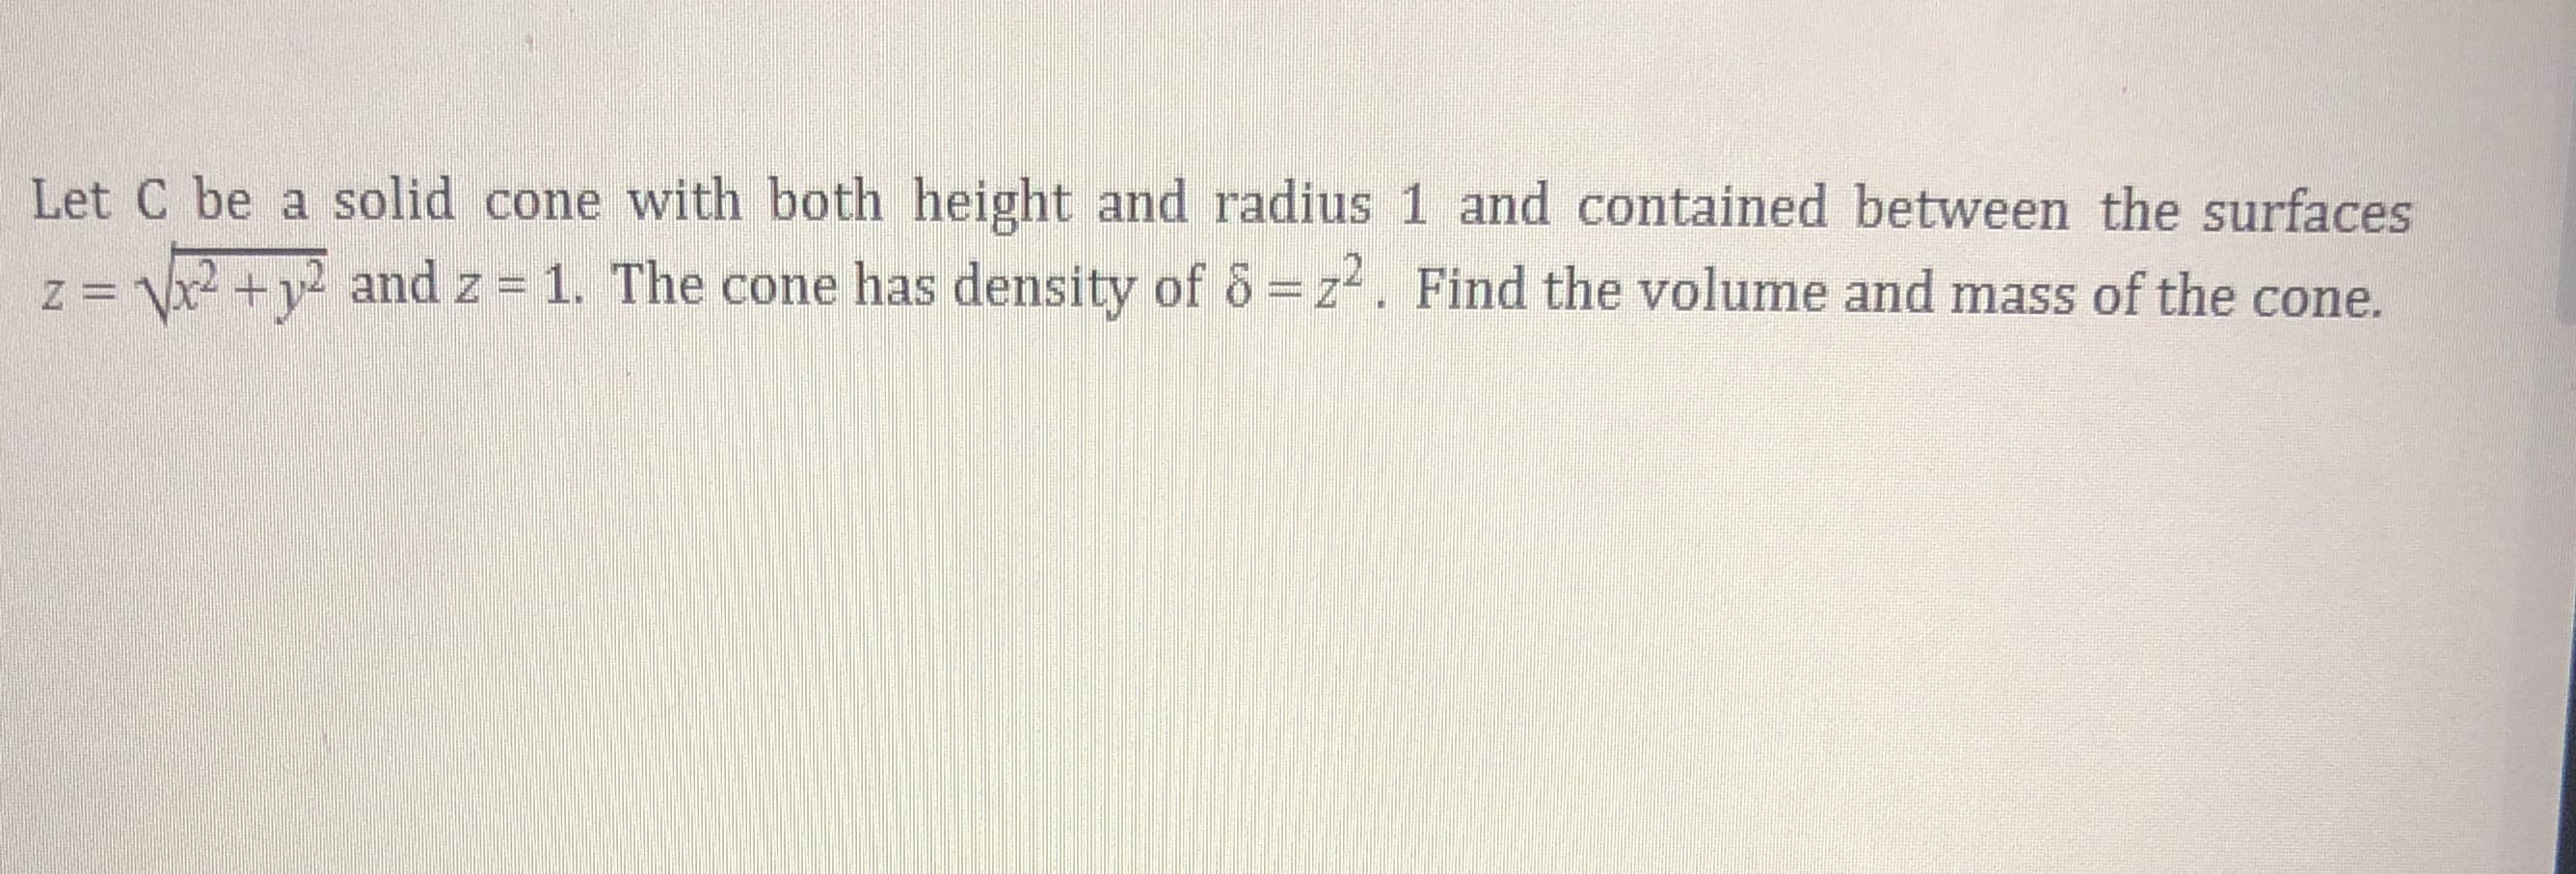 Let C be a solid cone with both height and radius 1 and contained between the surfaces
z = x2 + v² and z = 1. The cone has density of & = z. Find the volume and mass of the cone.
